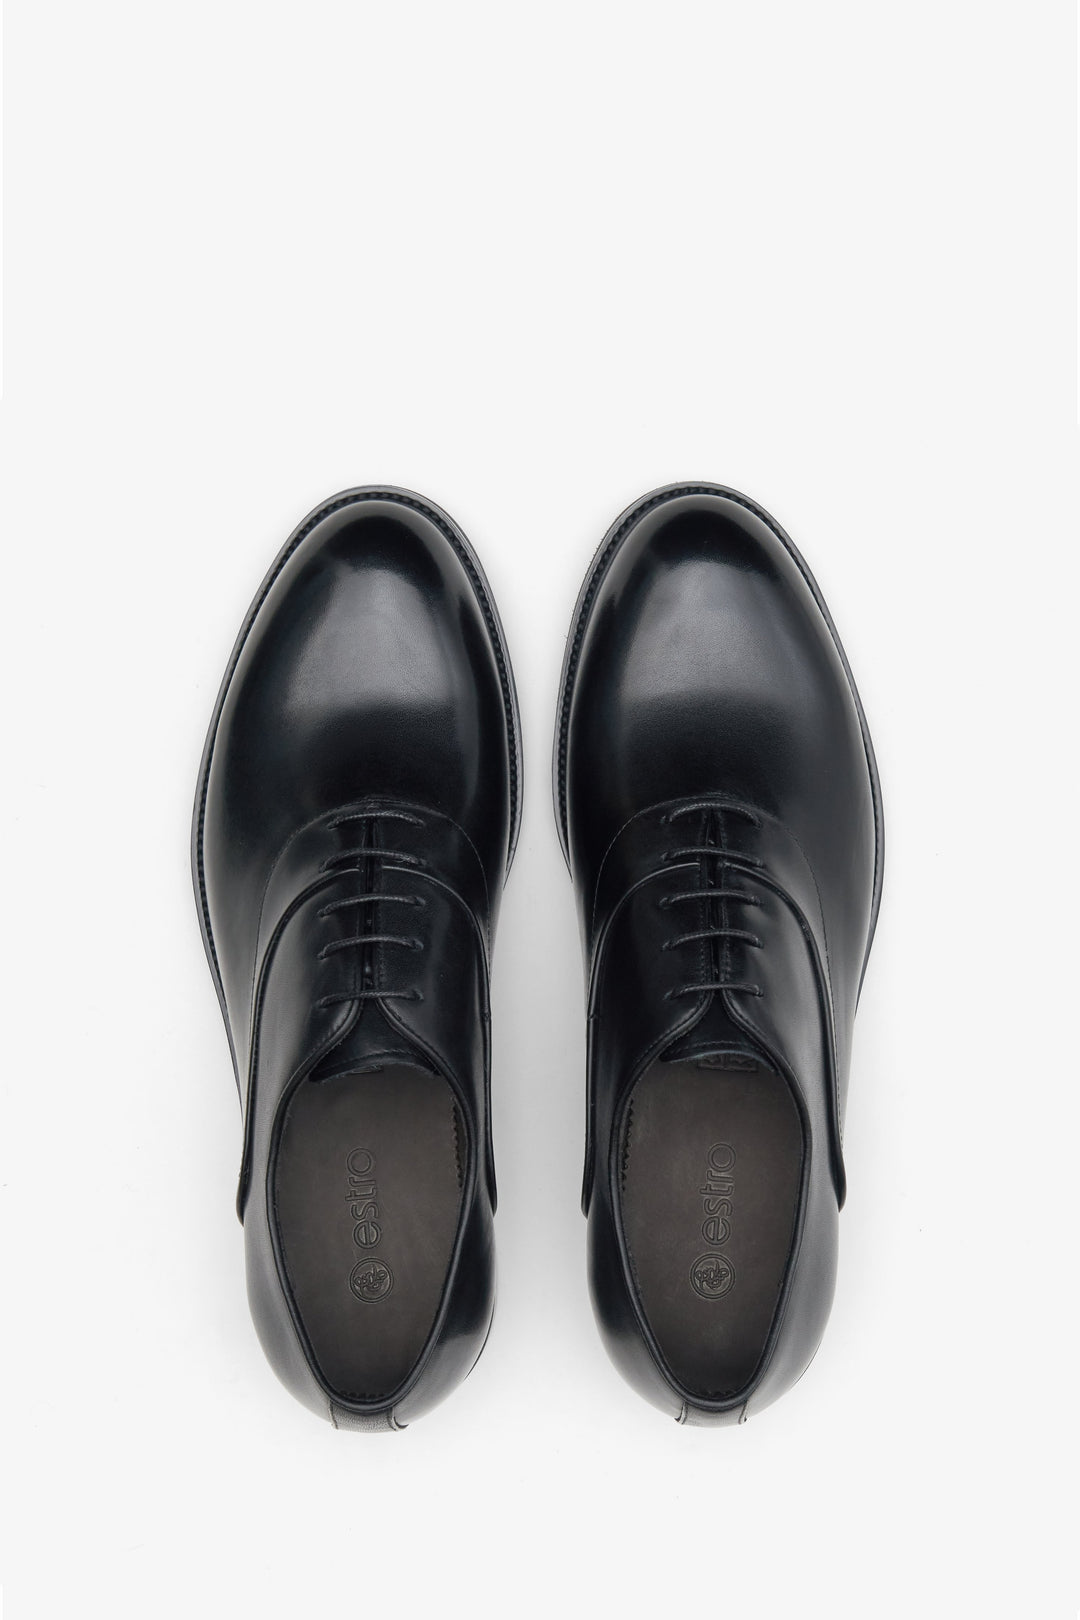 Men's black leather Oxford shoes by Estro - top view presentation of the model.